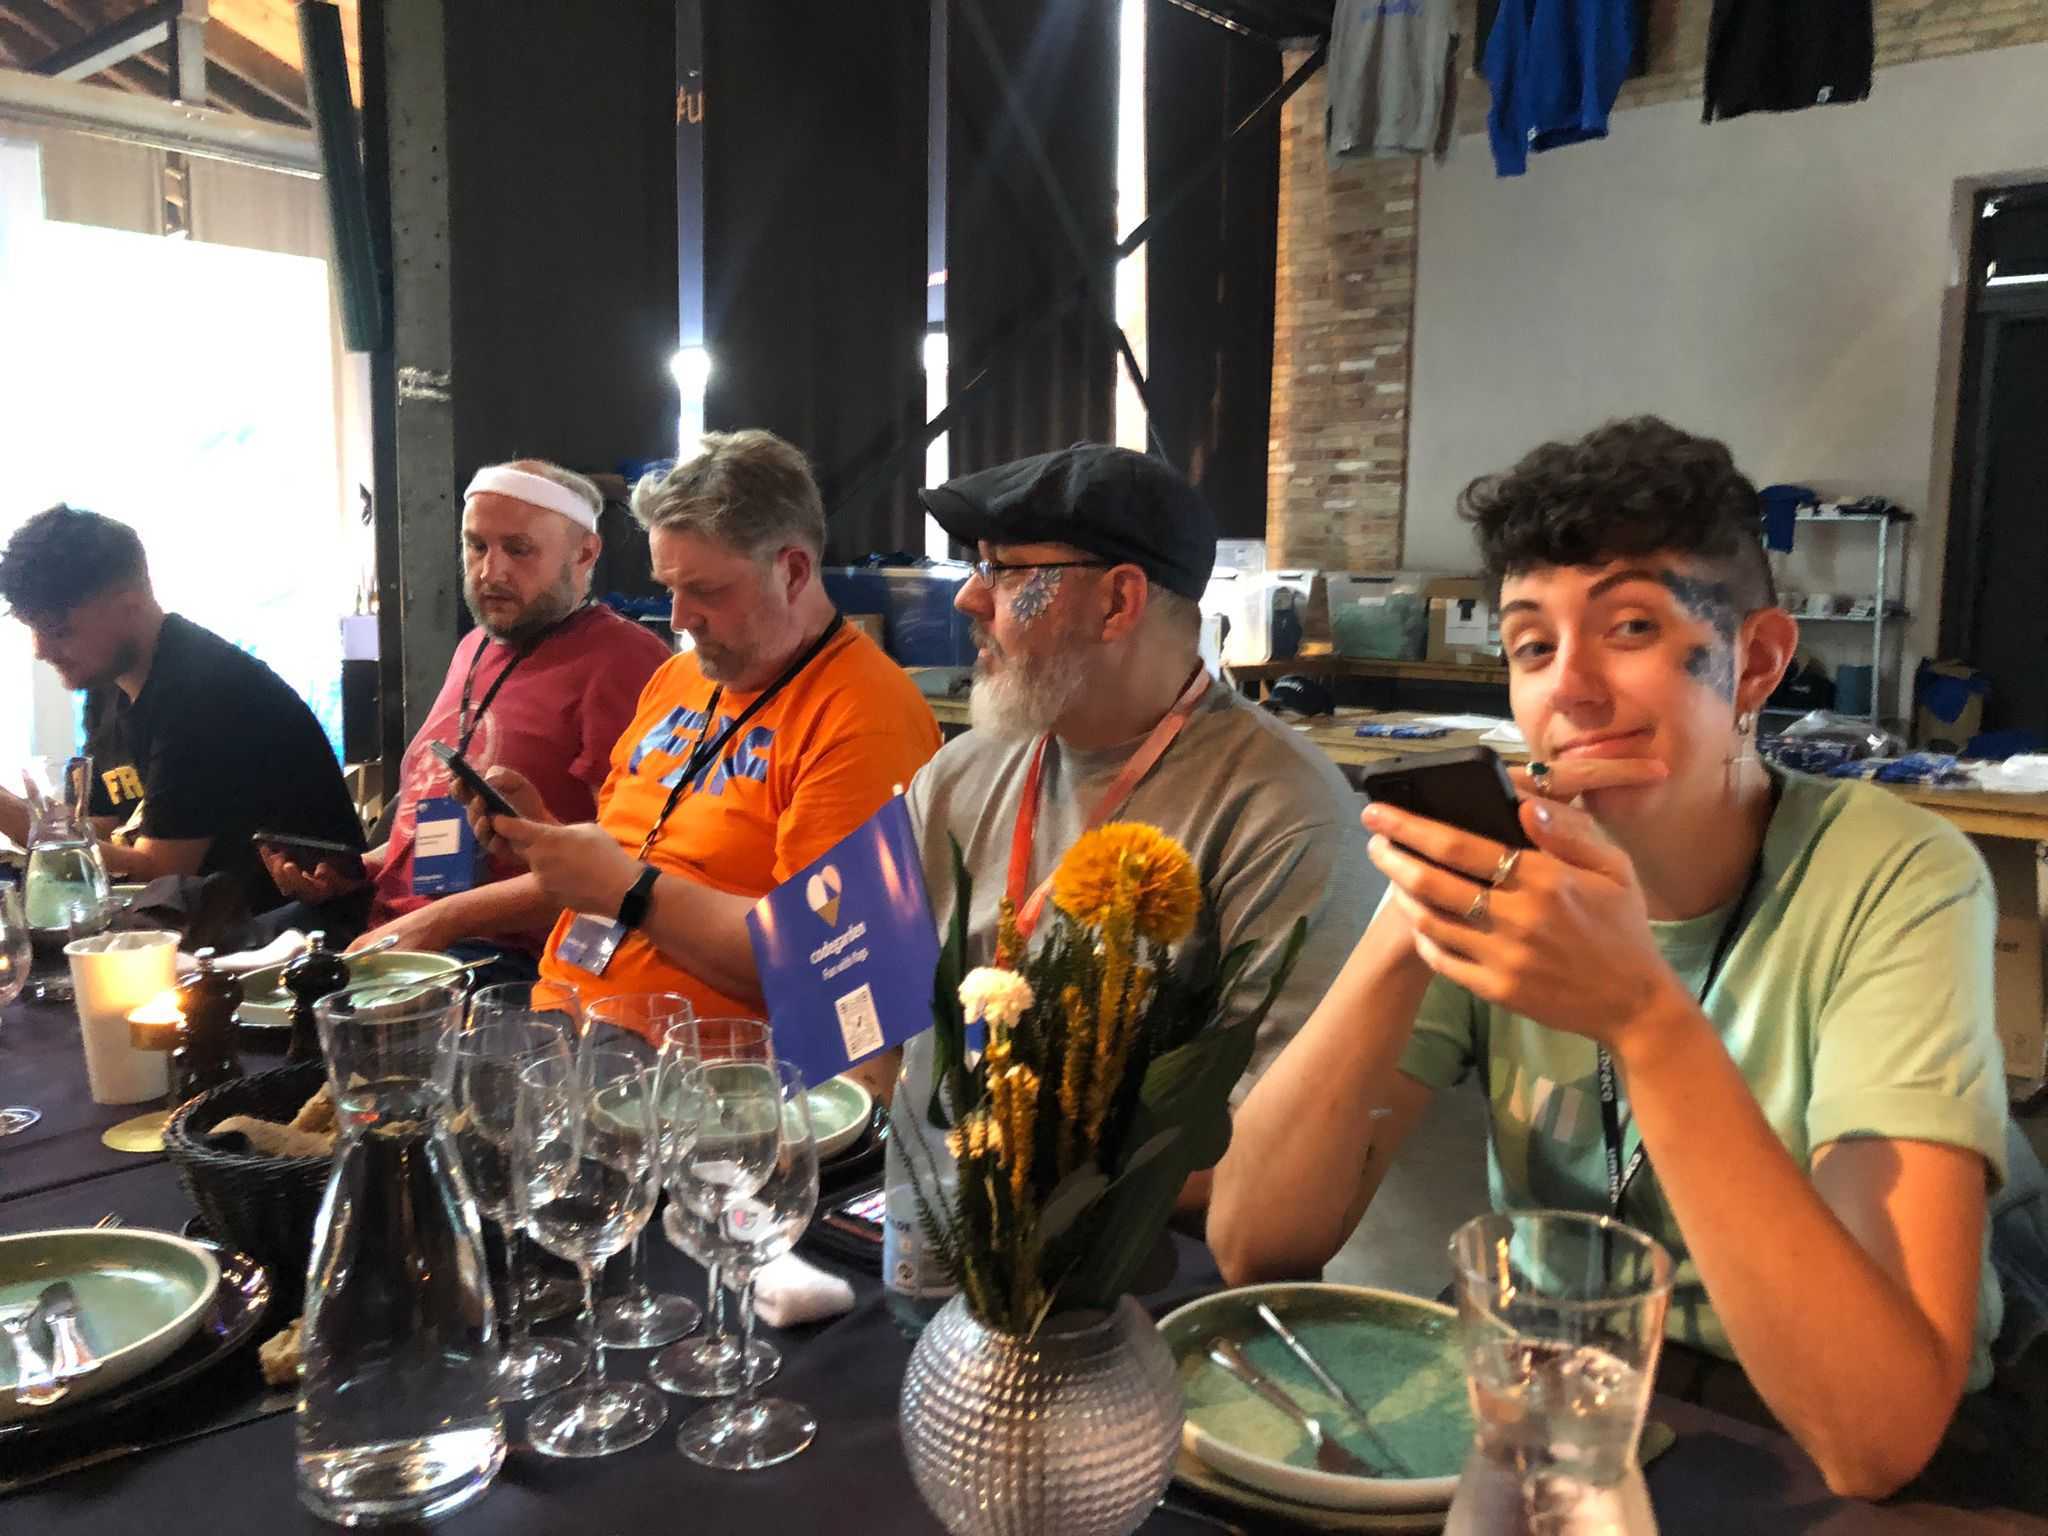 A picture of four team members from Crumpled Dog sitting at a dinner table. Two of them have face-painted designs, and one of them is wearing a sports-style sweatband.